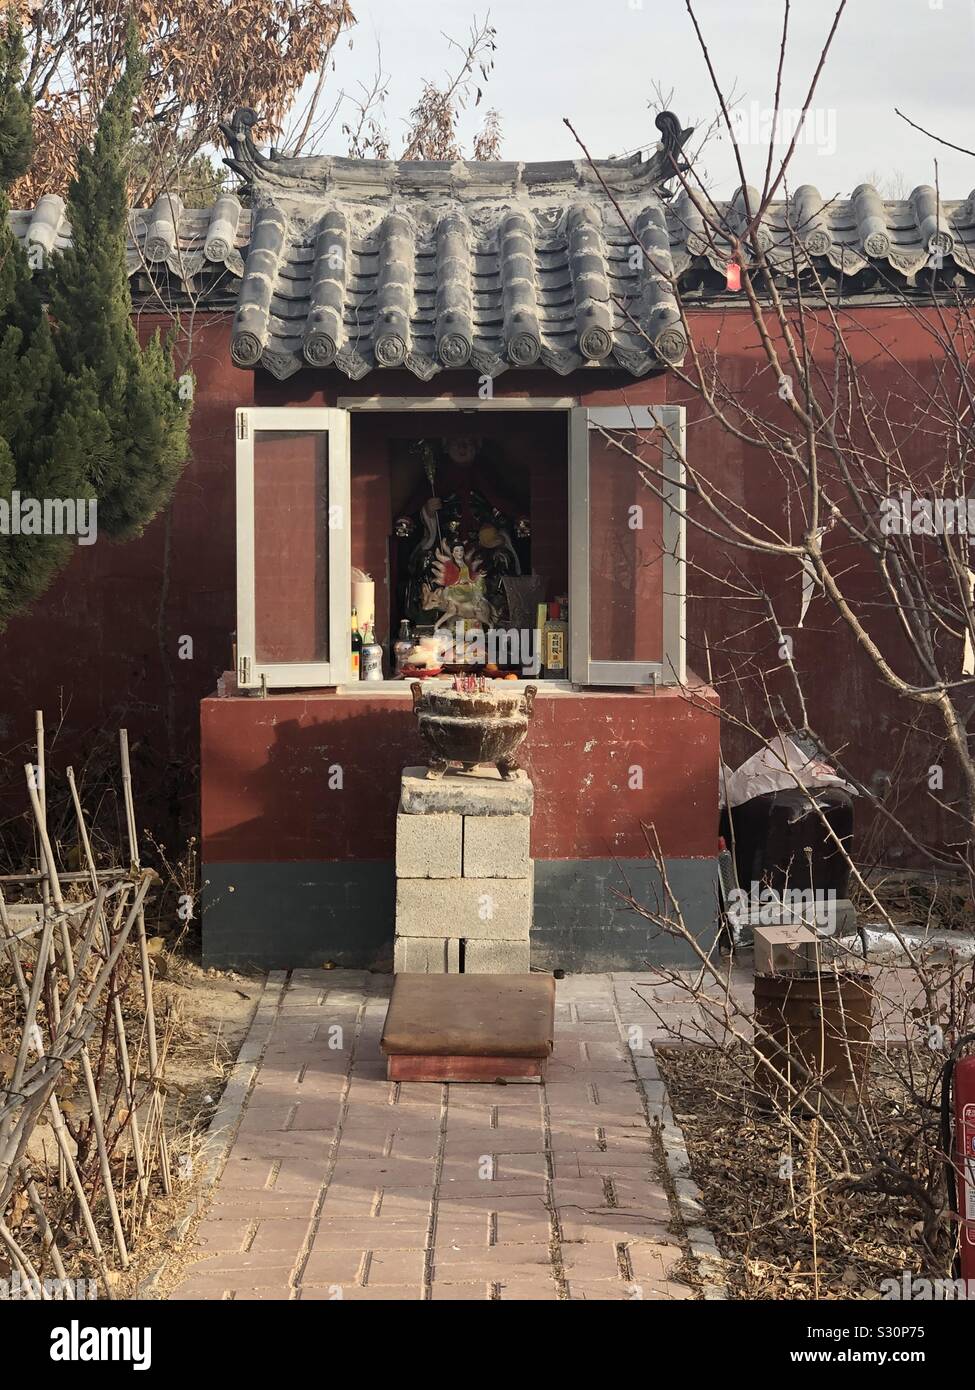 A shrine inside a temple in China, Shandong province showing flower beds,tree, shrubs, fire extinguisher. Stock Photo